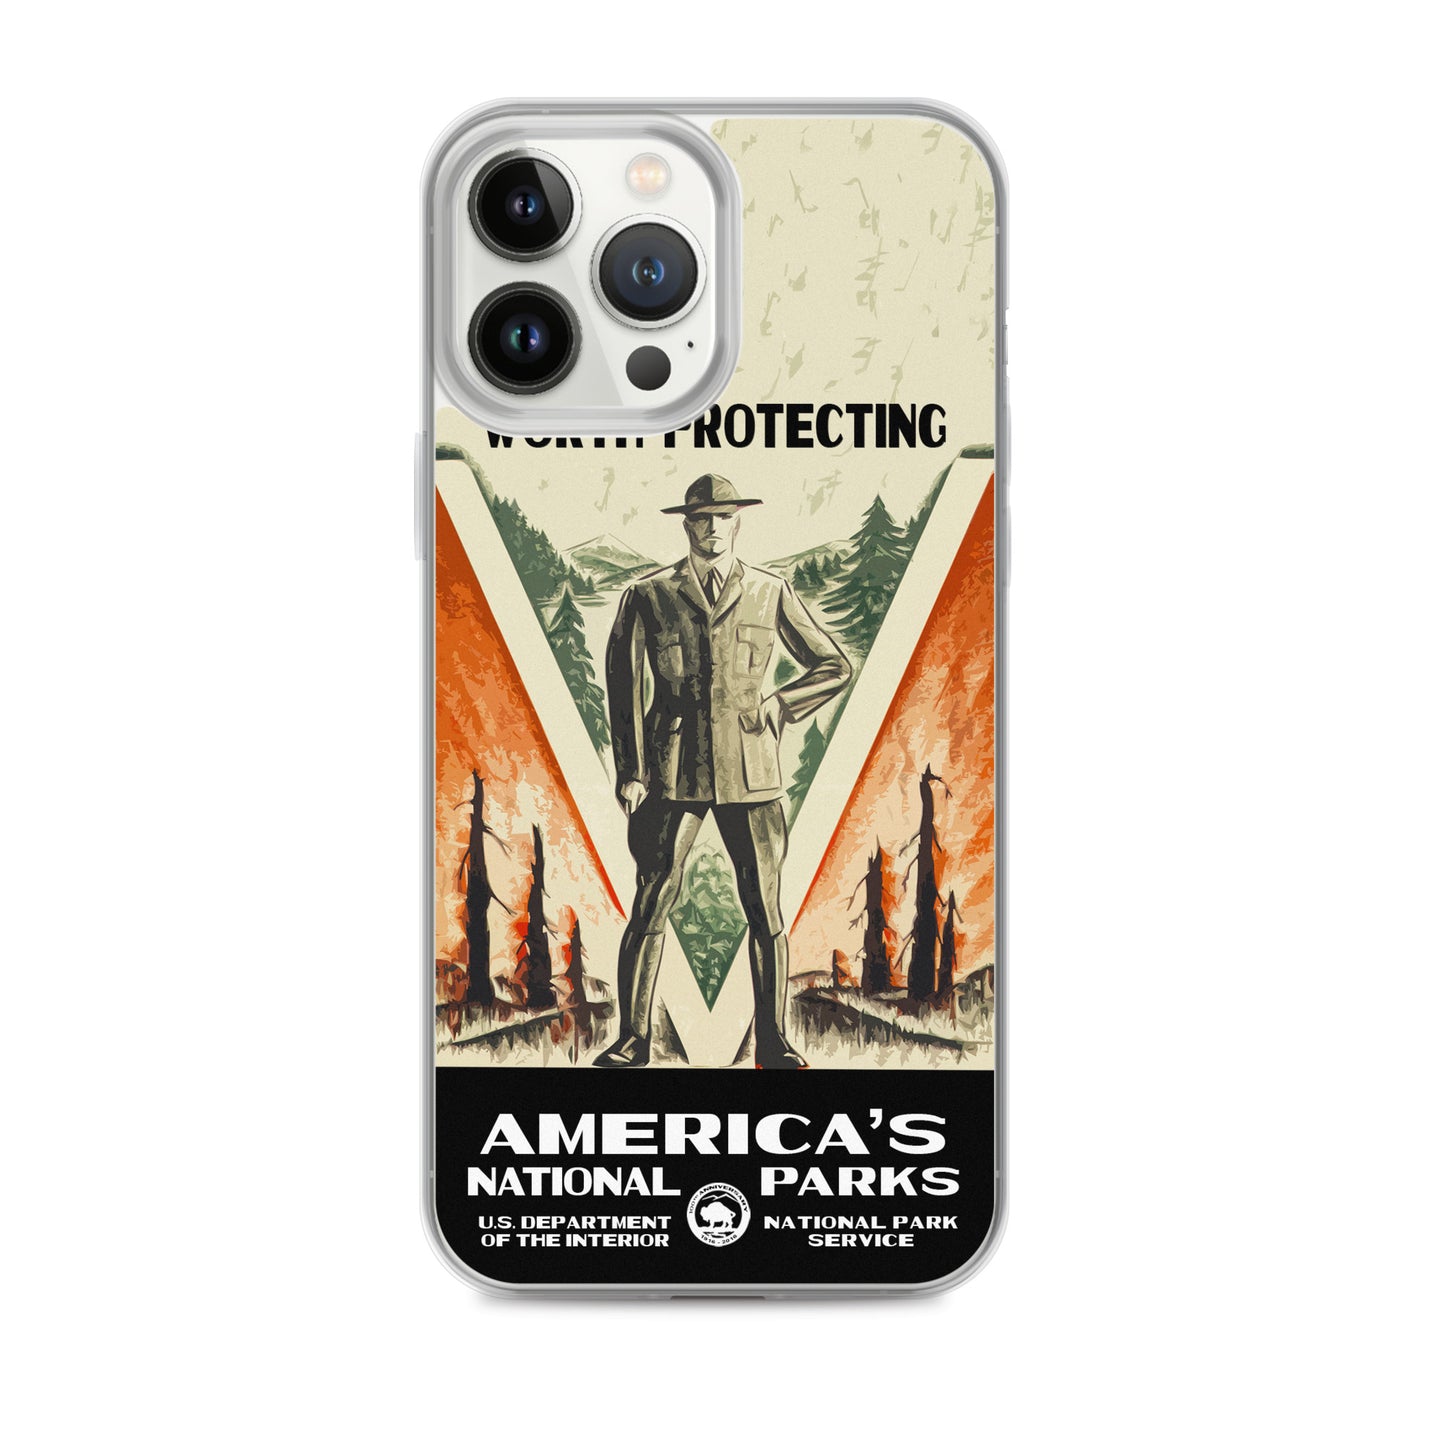 Worth Protecting iPhone® Case